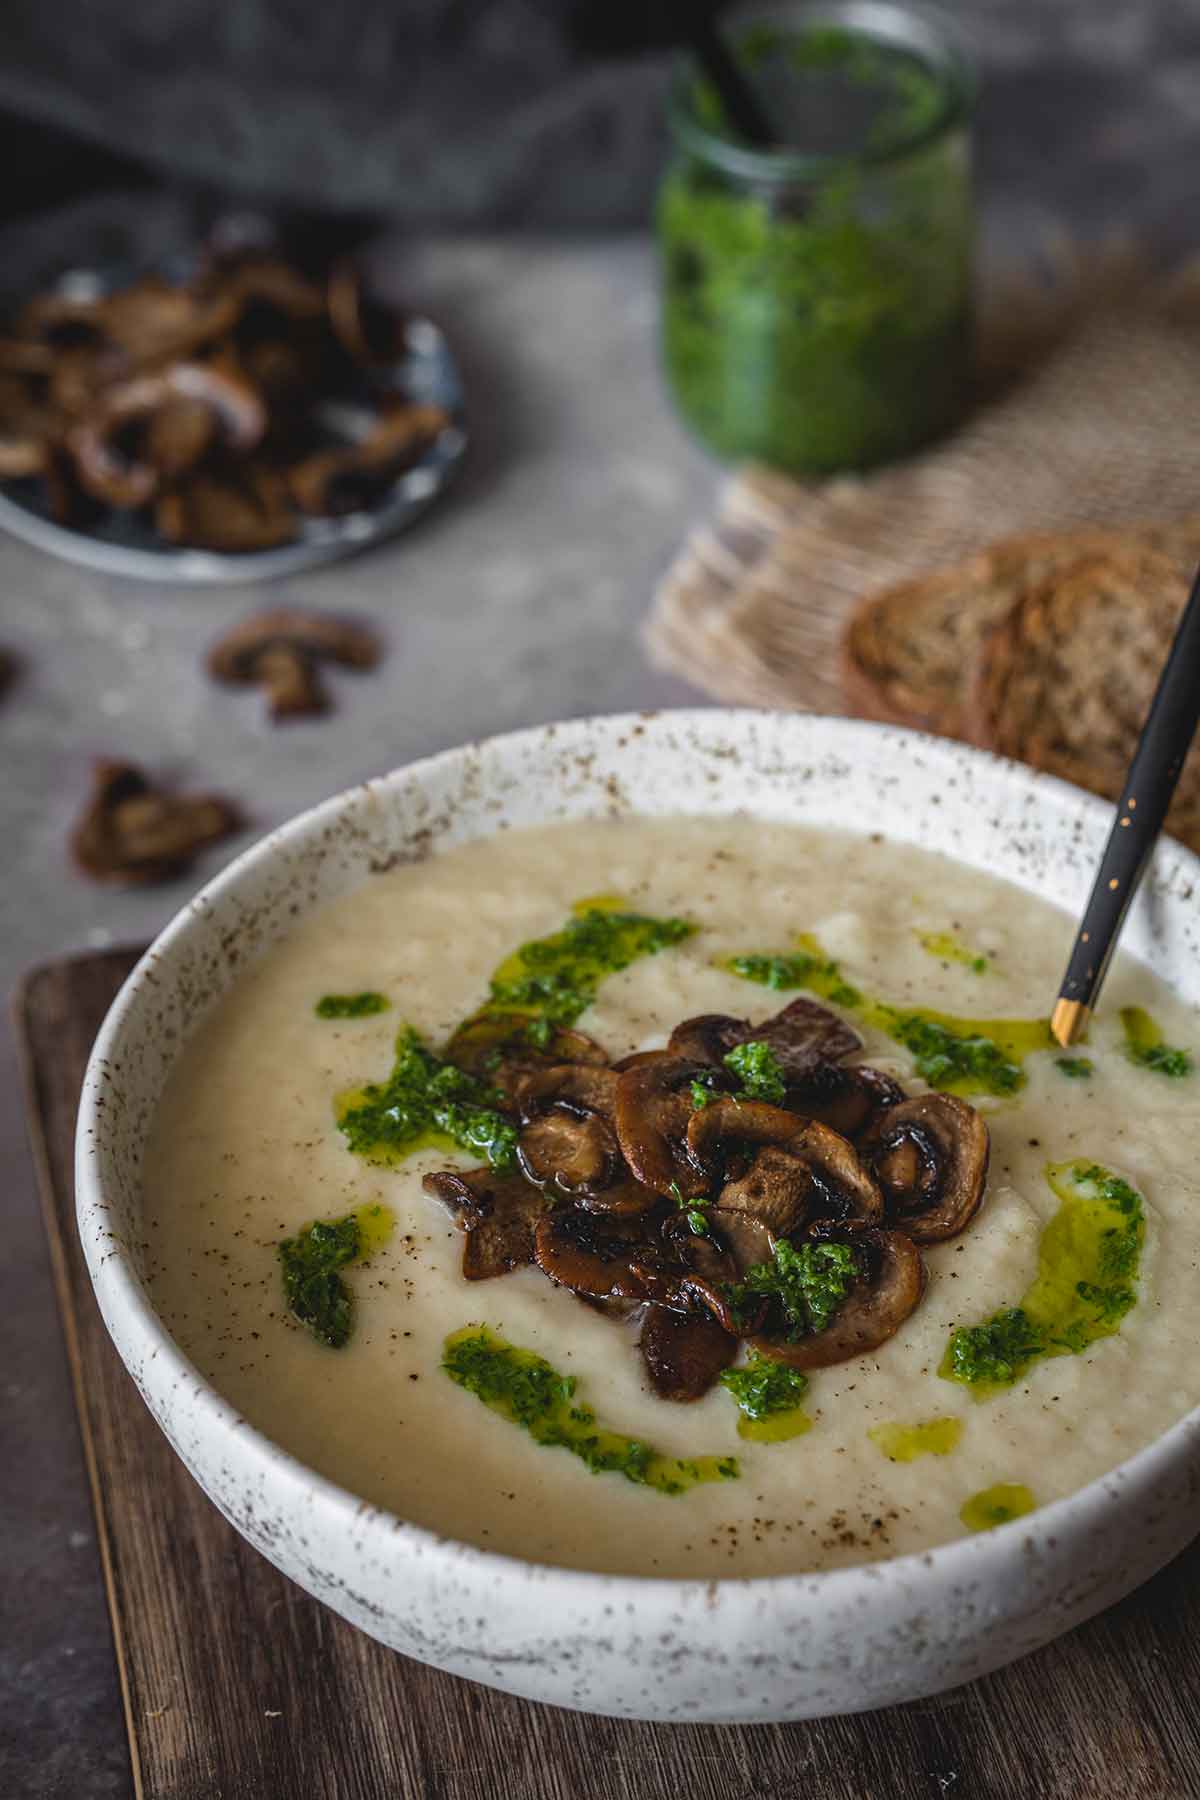 Celery root soup with mushrooms in a bowl